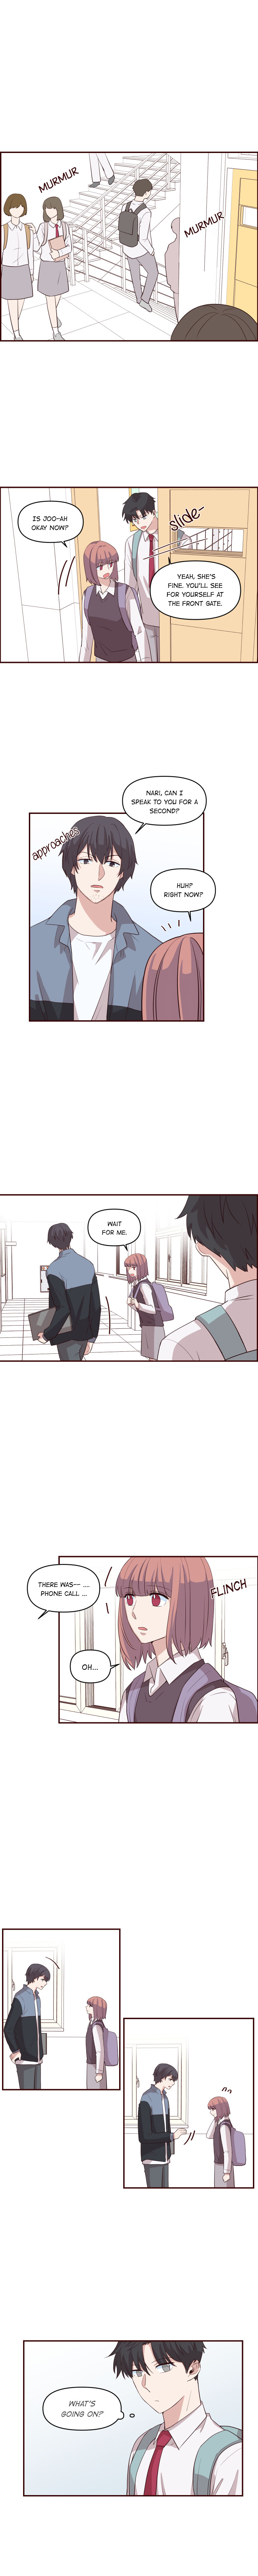 The Housewife Vol. 1 Ch. 26